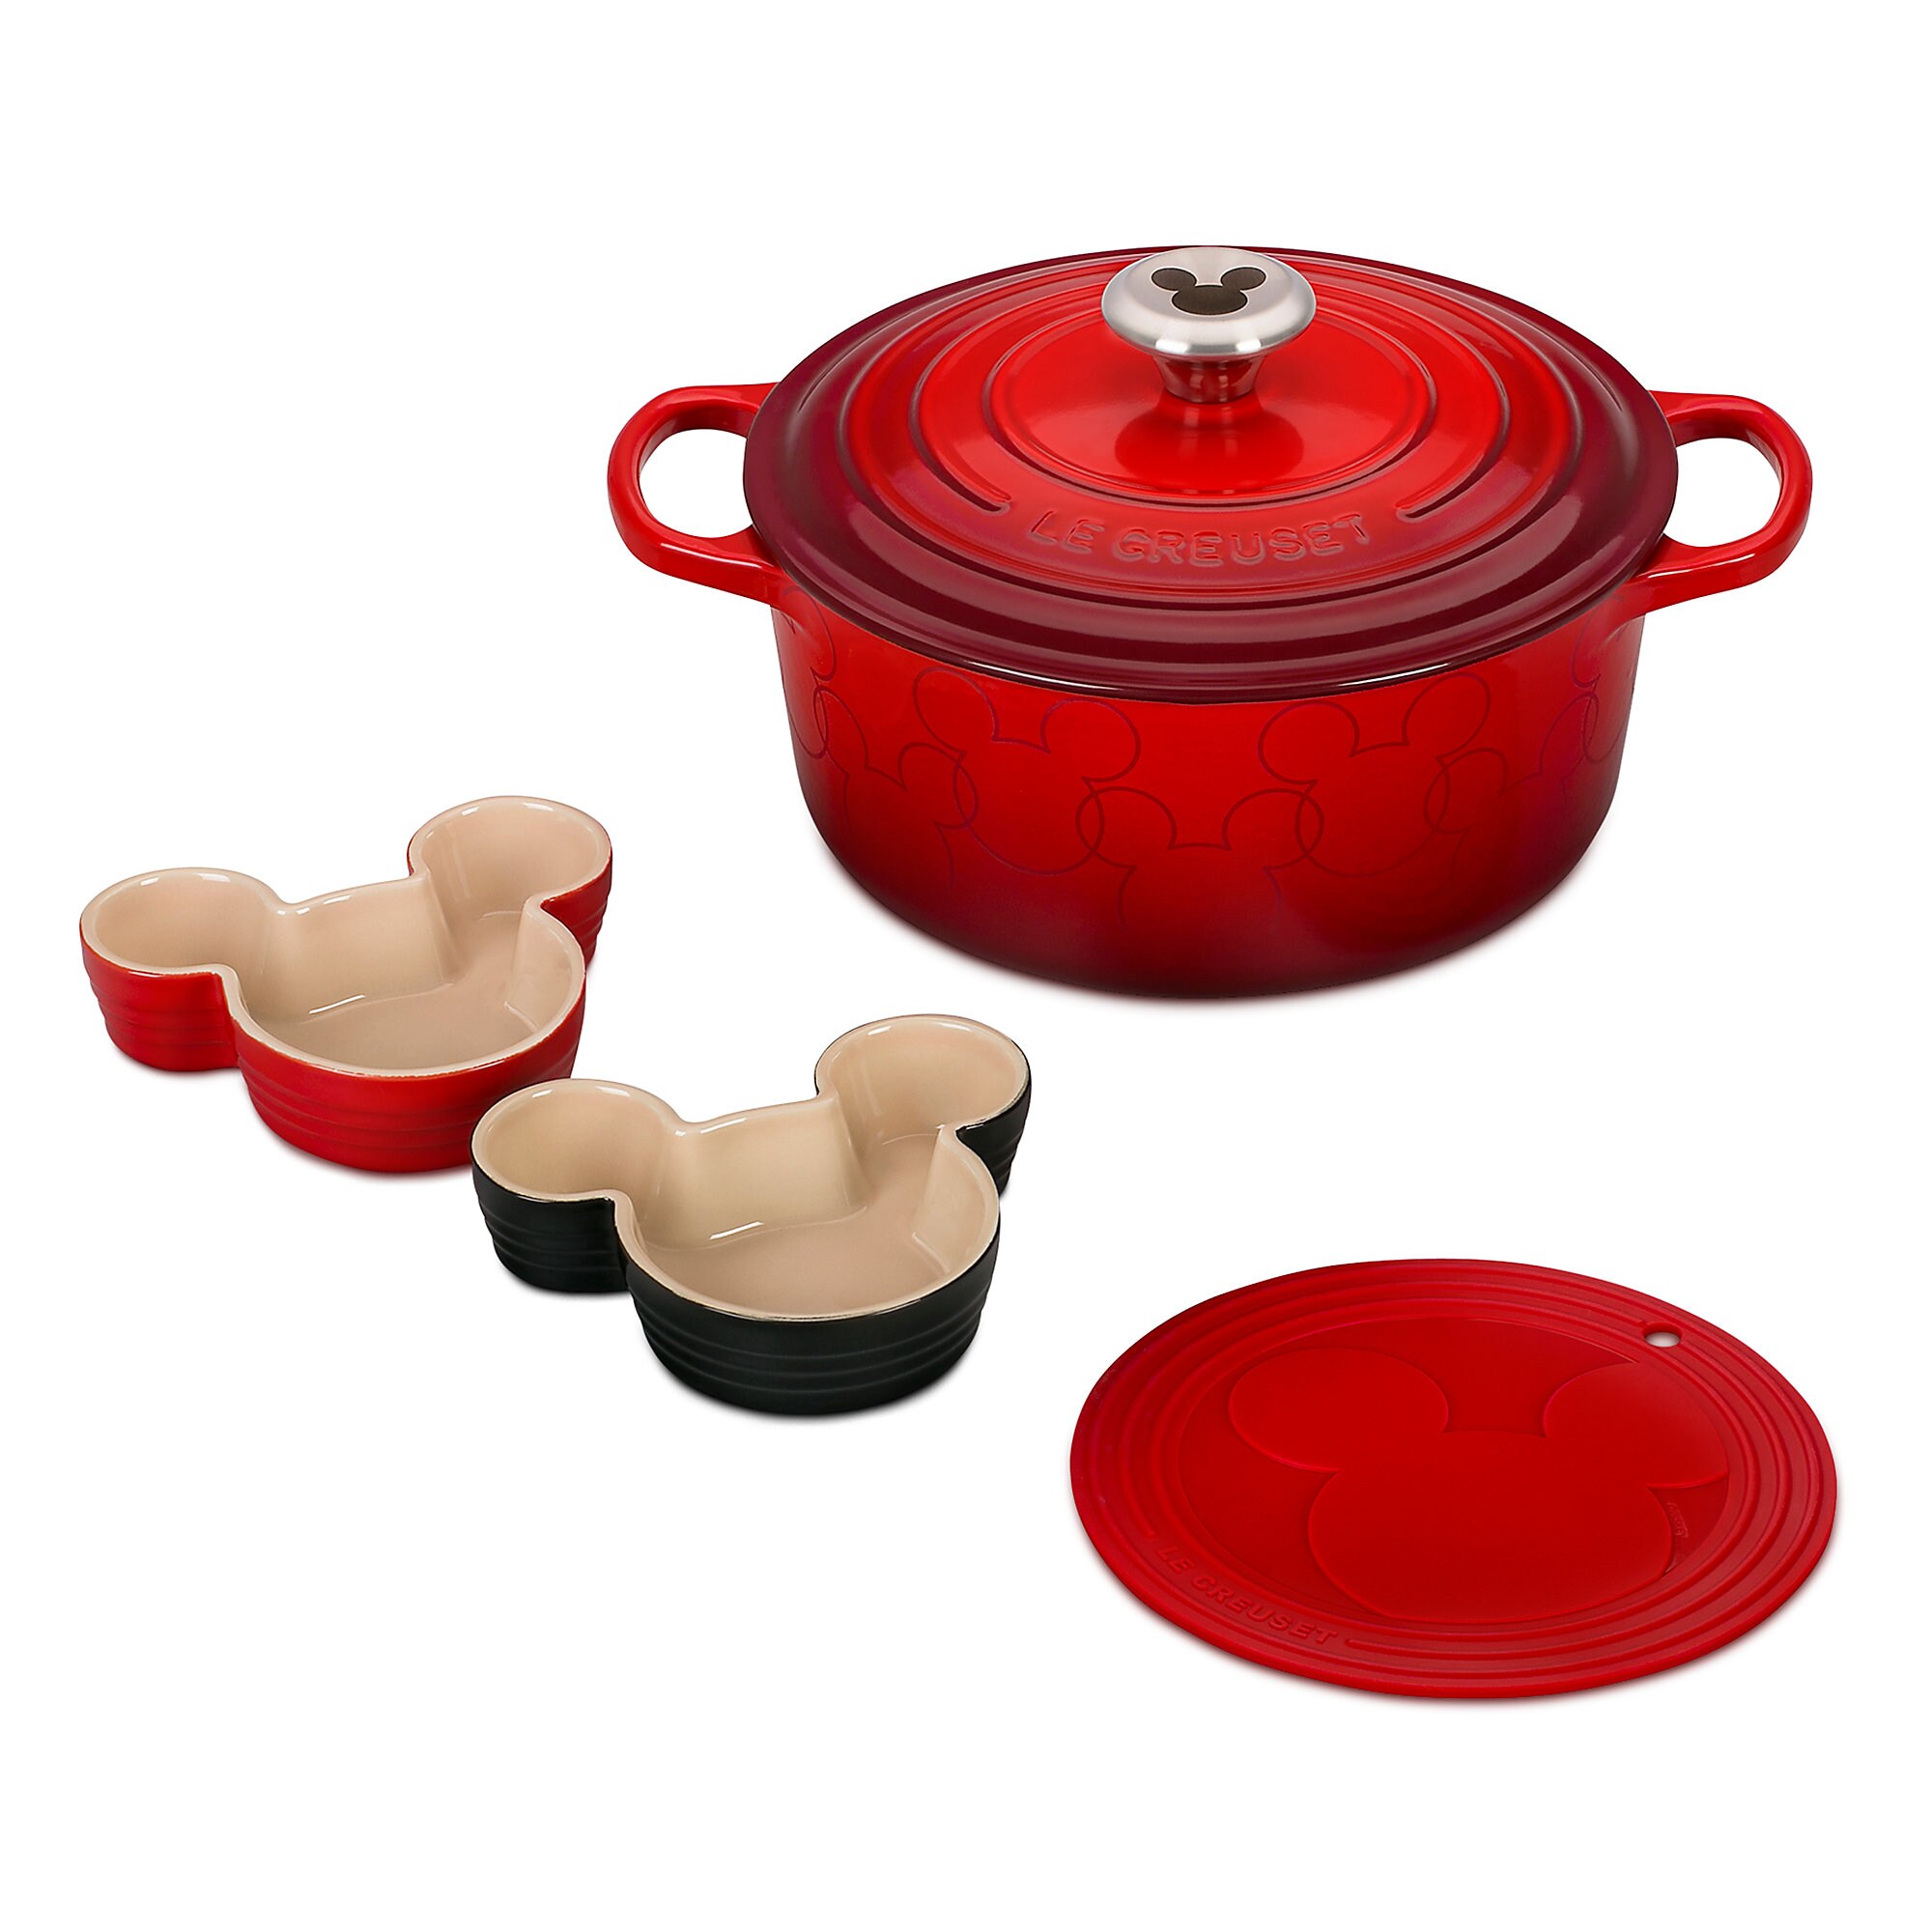 Mickey Mouse Le Creuset Set - Limited Edition